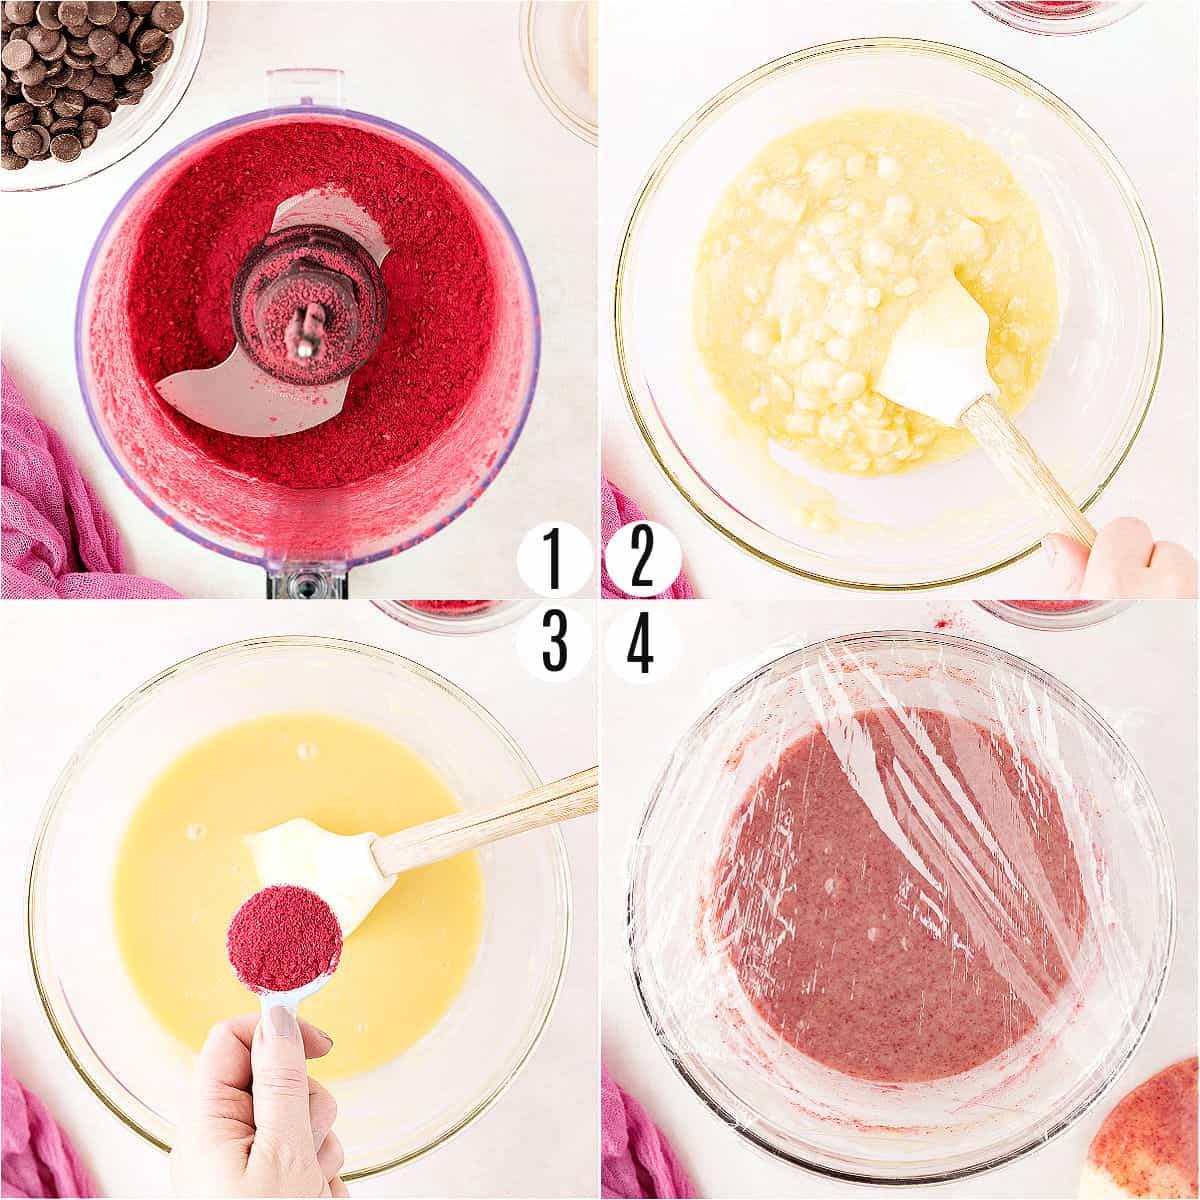 Step by step photos showing how to make raspberry truffles.